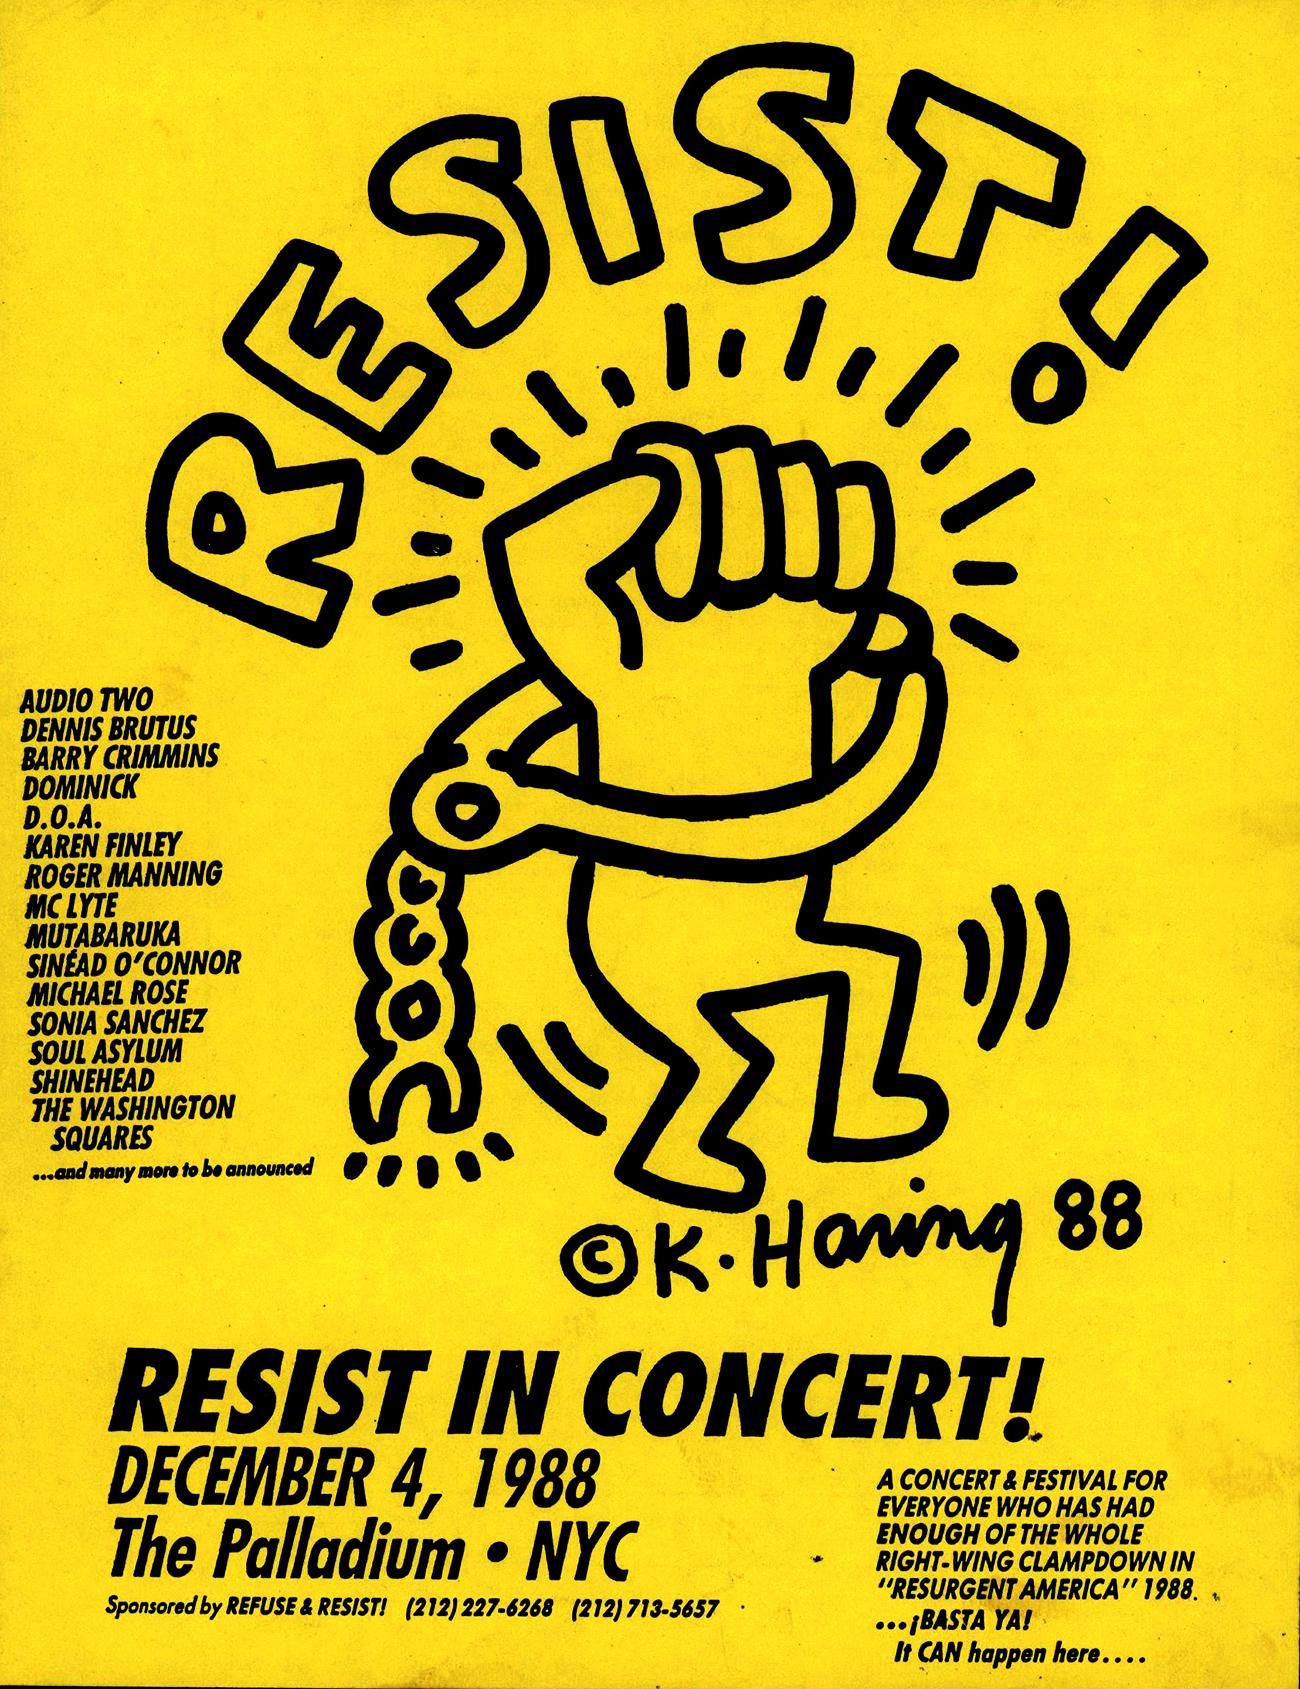 Keith Haring Resist in Concert! 1988: 
Vintage Keith Haring illustrated 1988 poster for a Refuse and Resist produced concert December 4, 1988 at New York's Palladium nightclub. A rare Haring activist poster produced during the artist's lifetime.